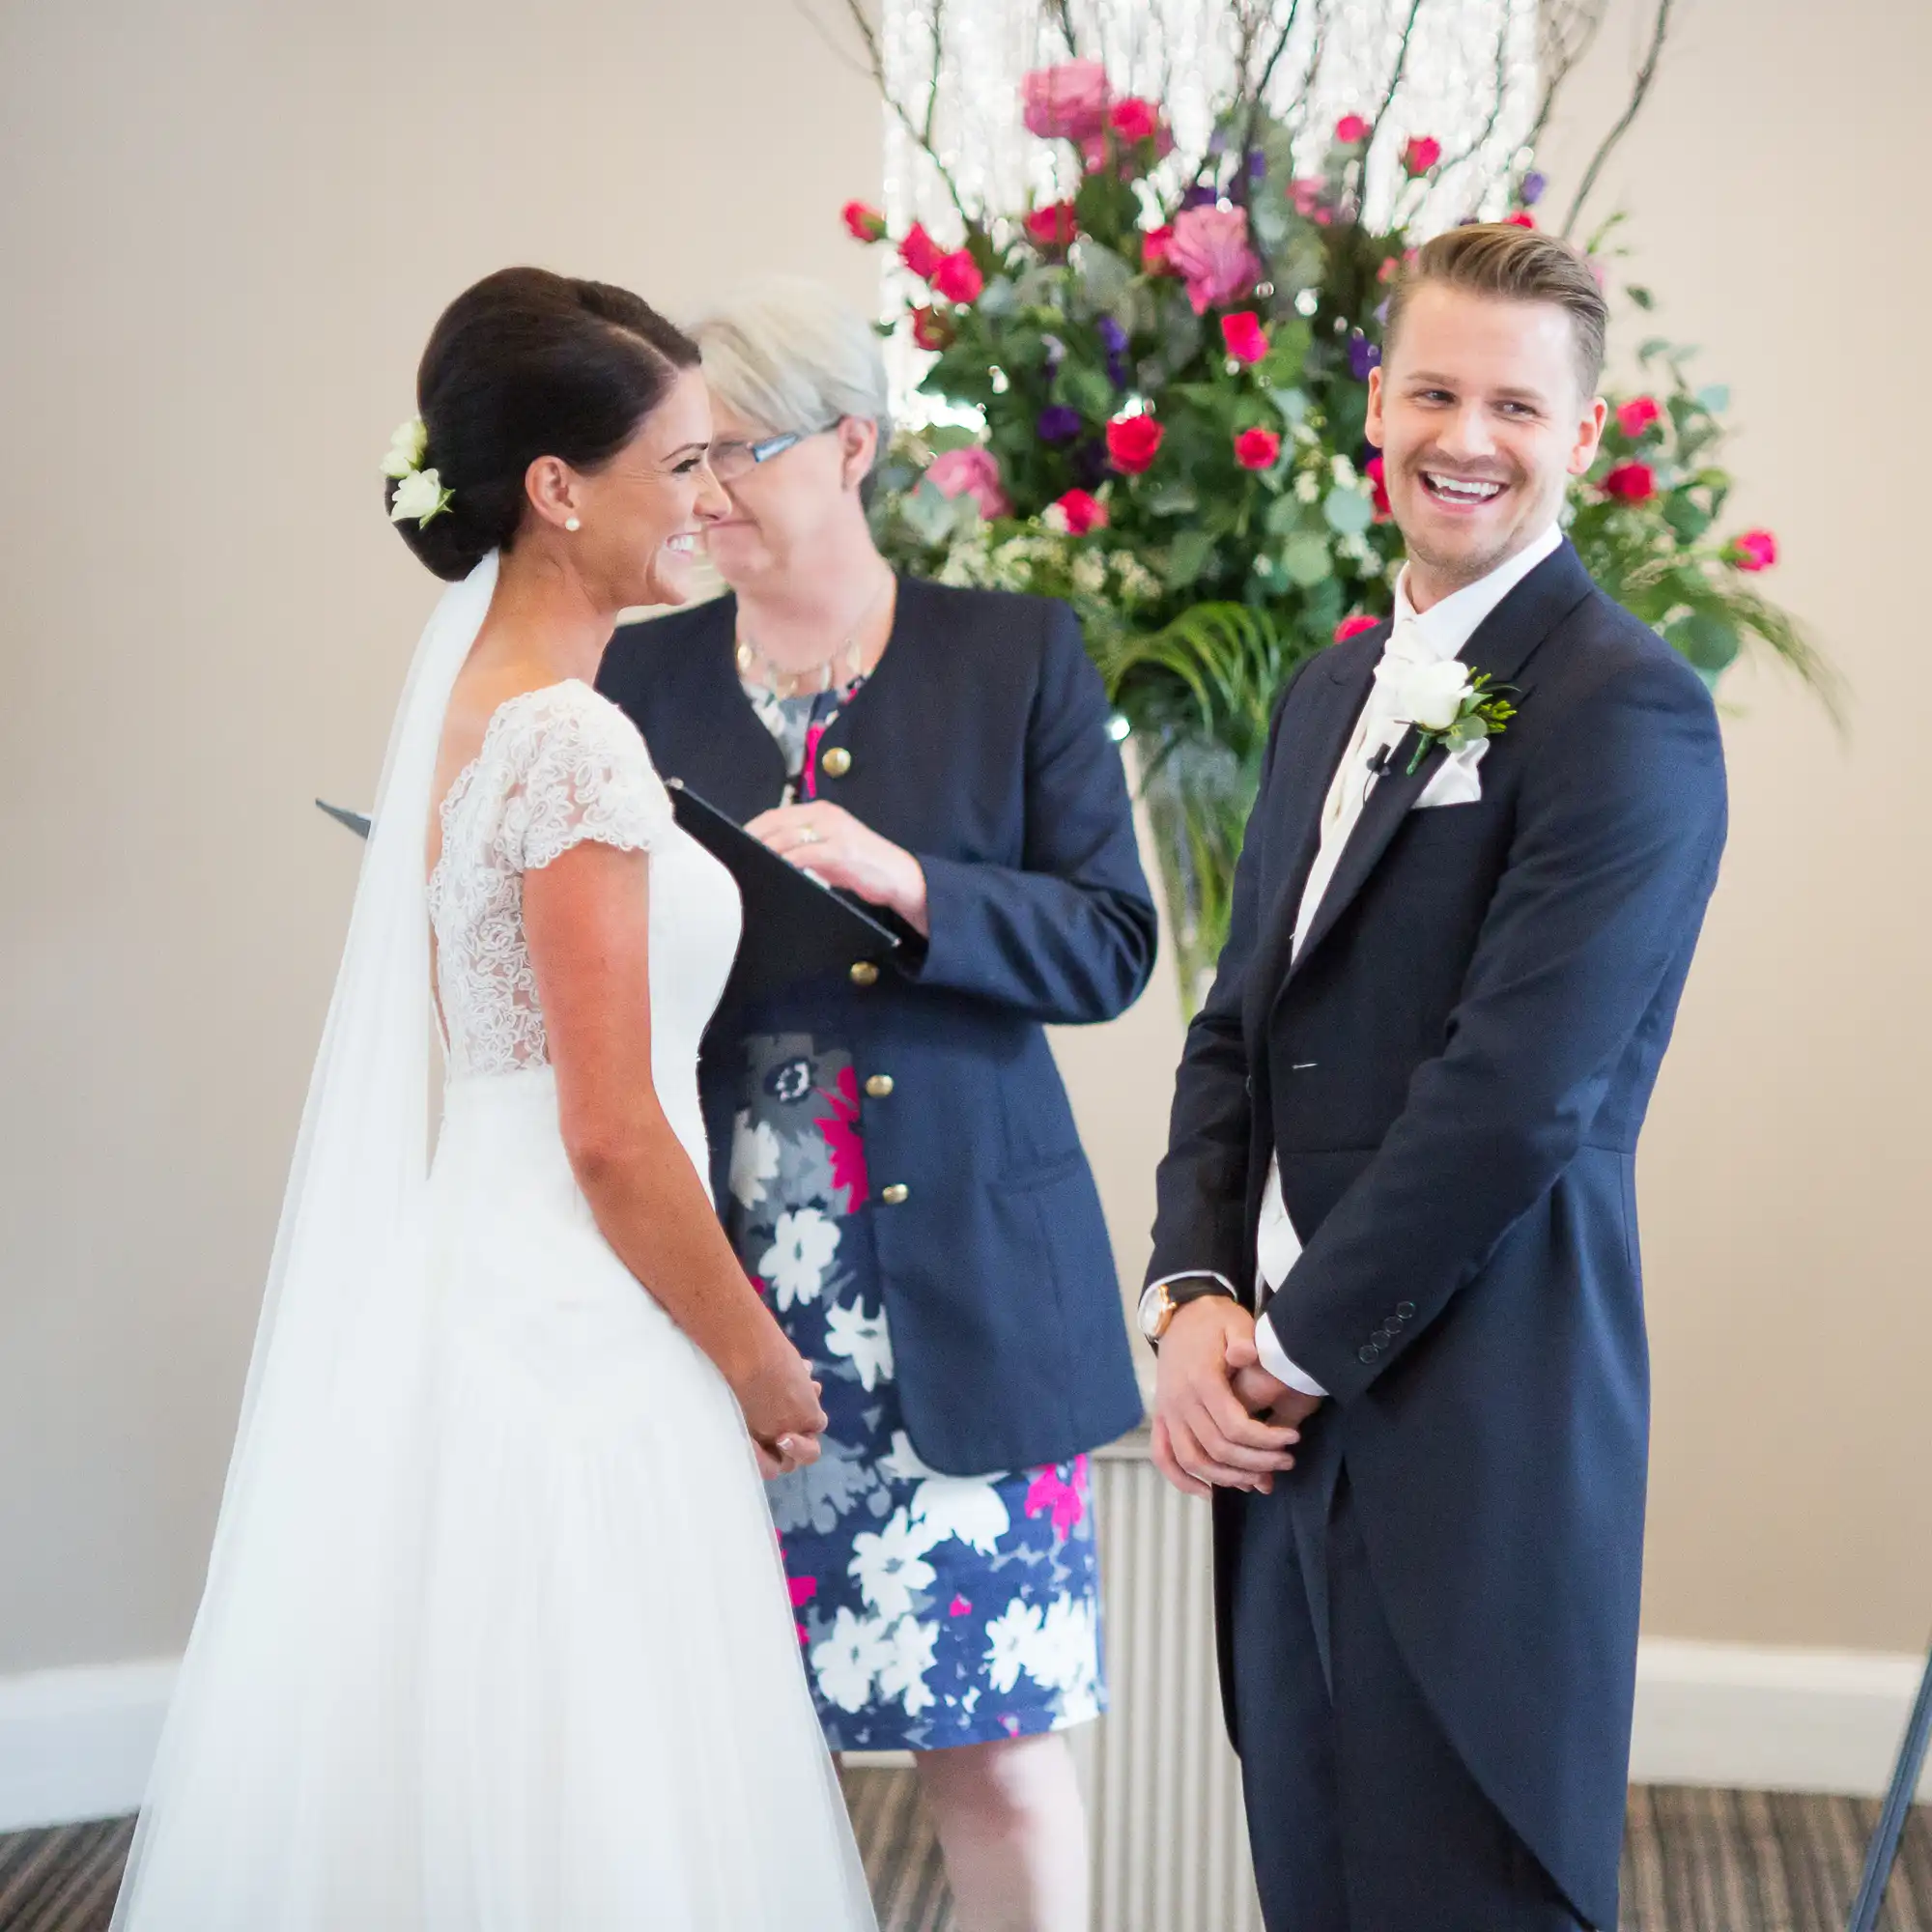 A bride and groom smiling at each other during their wedding ceremony, with an officiant in the background.